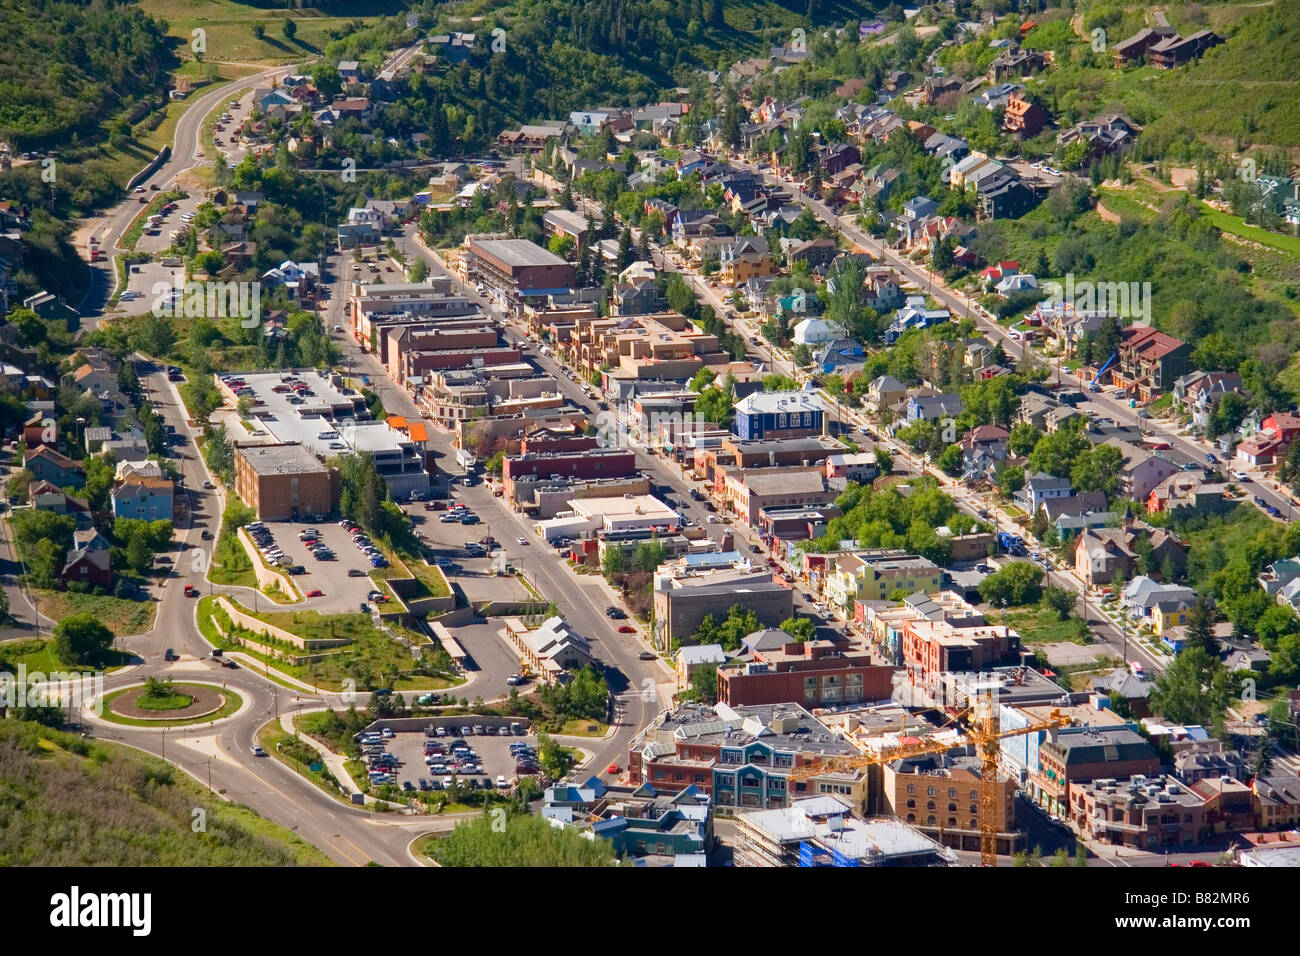 Aerial view of the Historic Main Street scection of Park City a year round resort town in the Wasatch Mountains of northern Utah Stock Photo